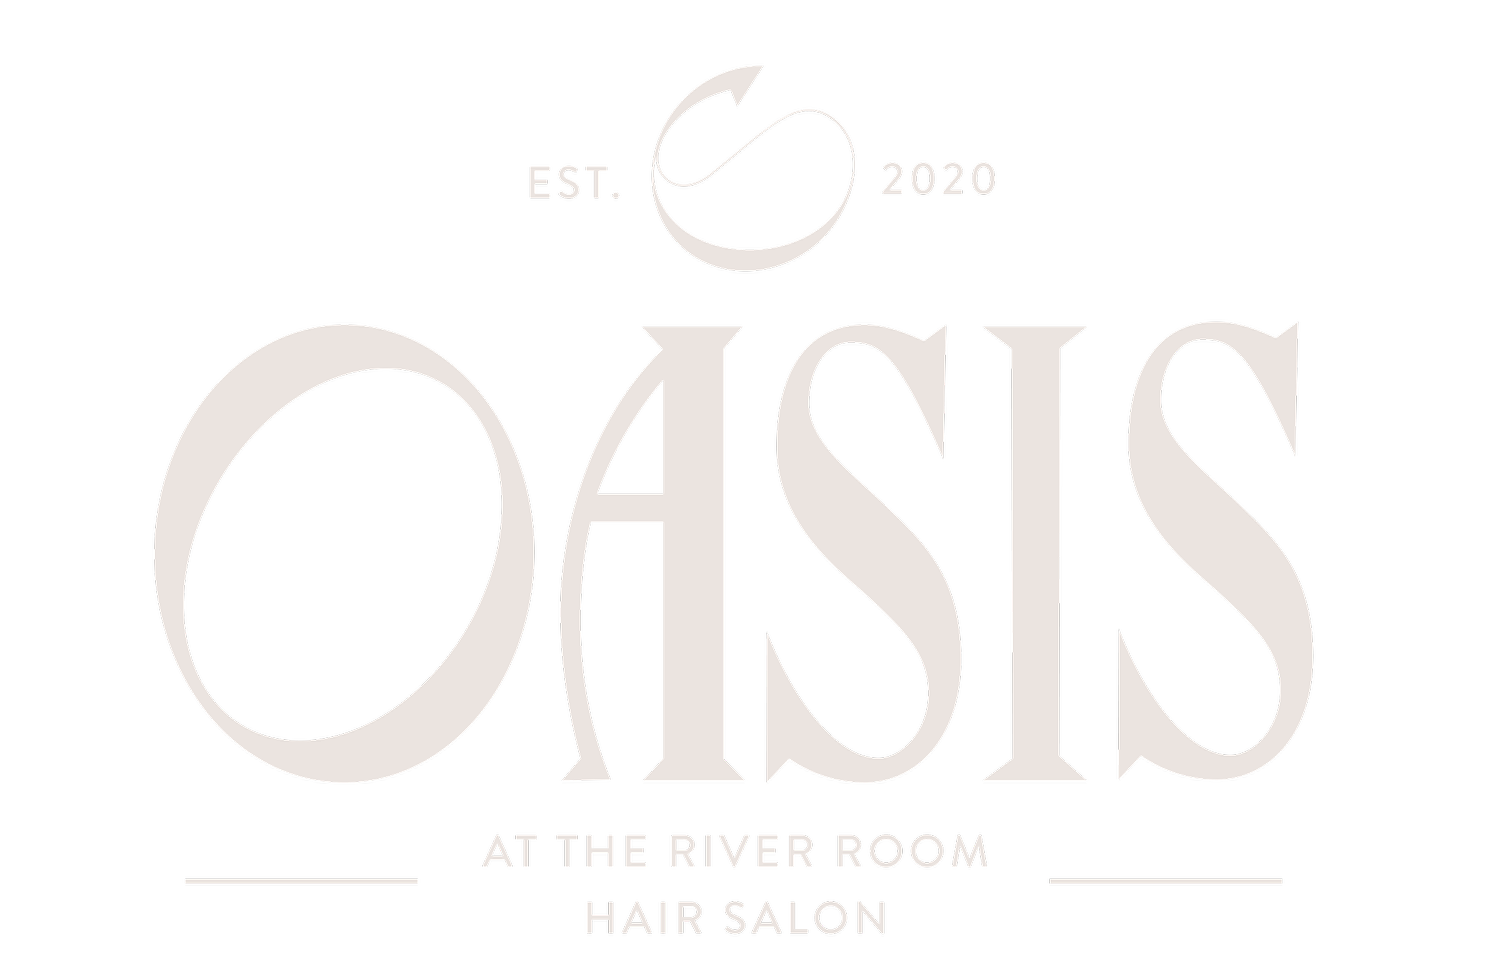 Oasis at The River Room